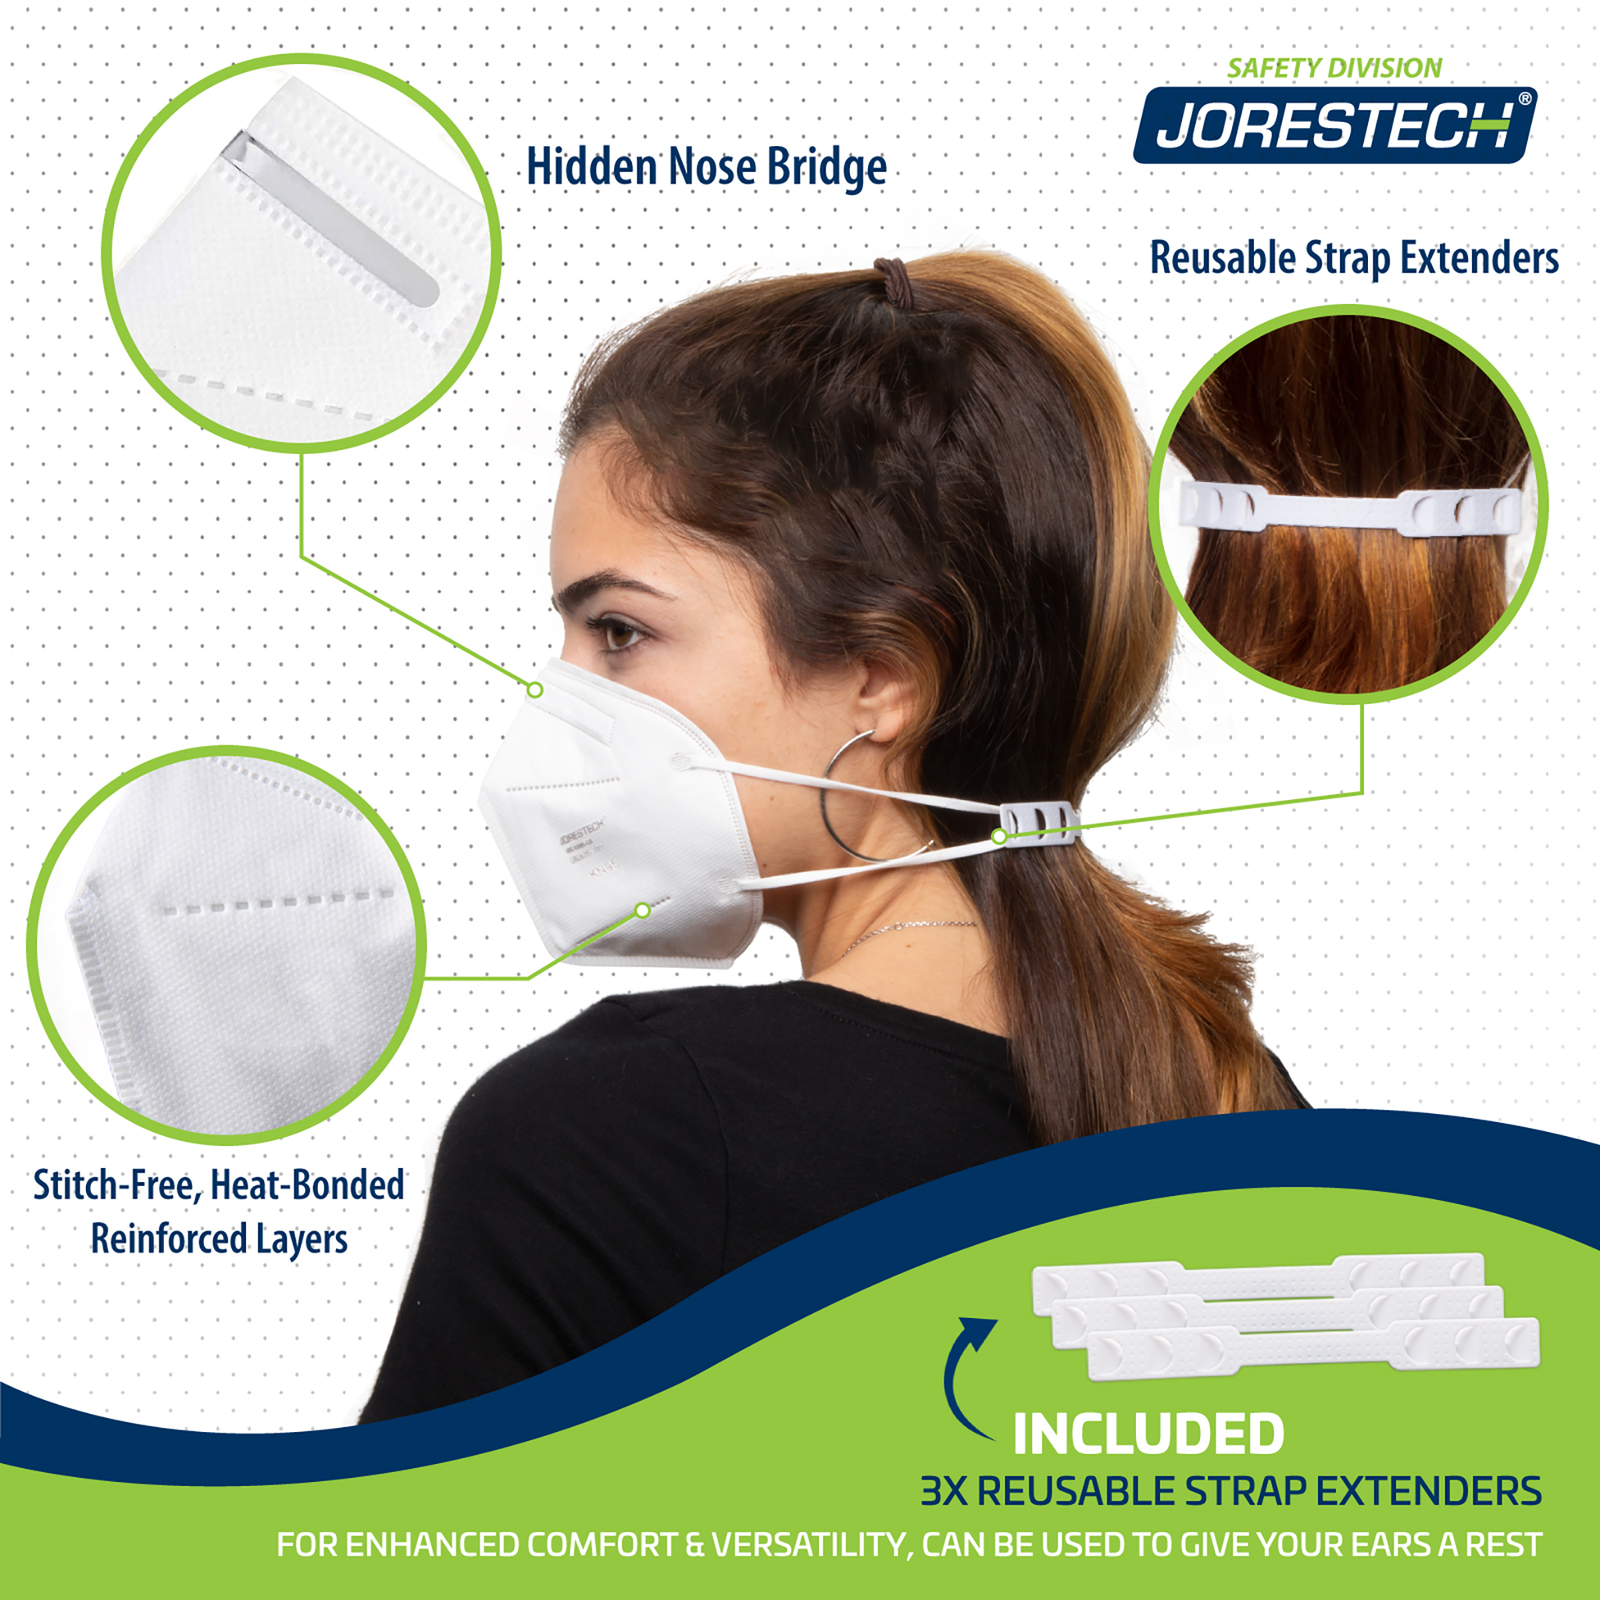 Woman wearing a JORESTECH safety mask and using the reusable straps extenders. Call outs with text read: Soft hidden nose bridge, stitch-free heat bonded reinforced layers. 3 reusable strap extenders included for enhanced confort and versatility, can be used to give your ears a rest.